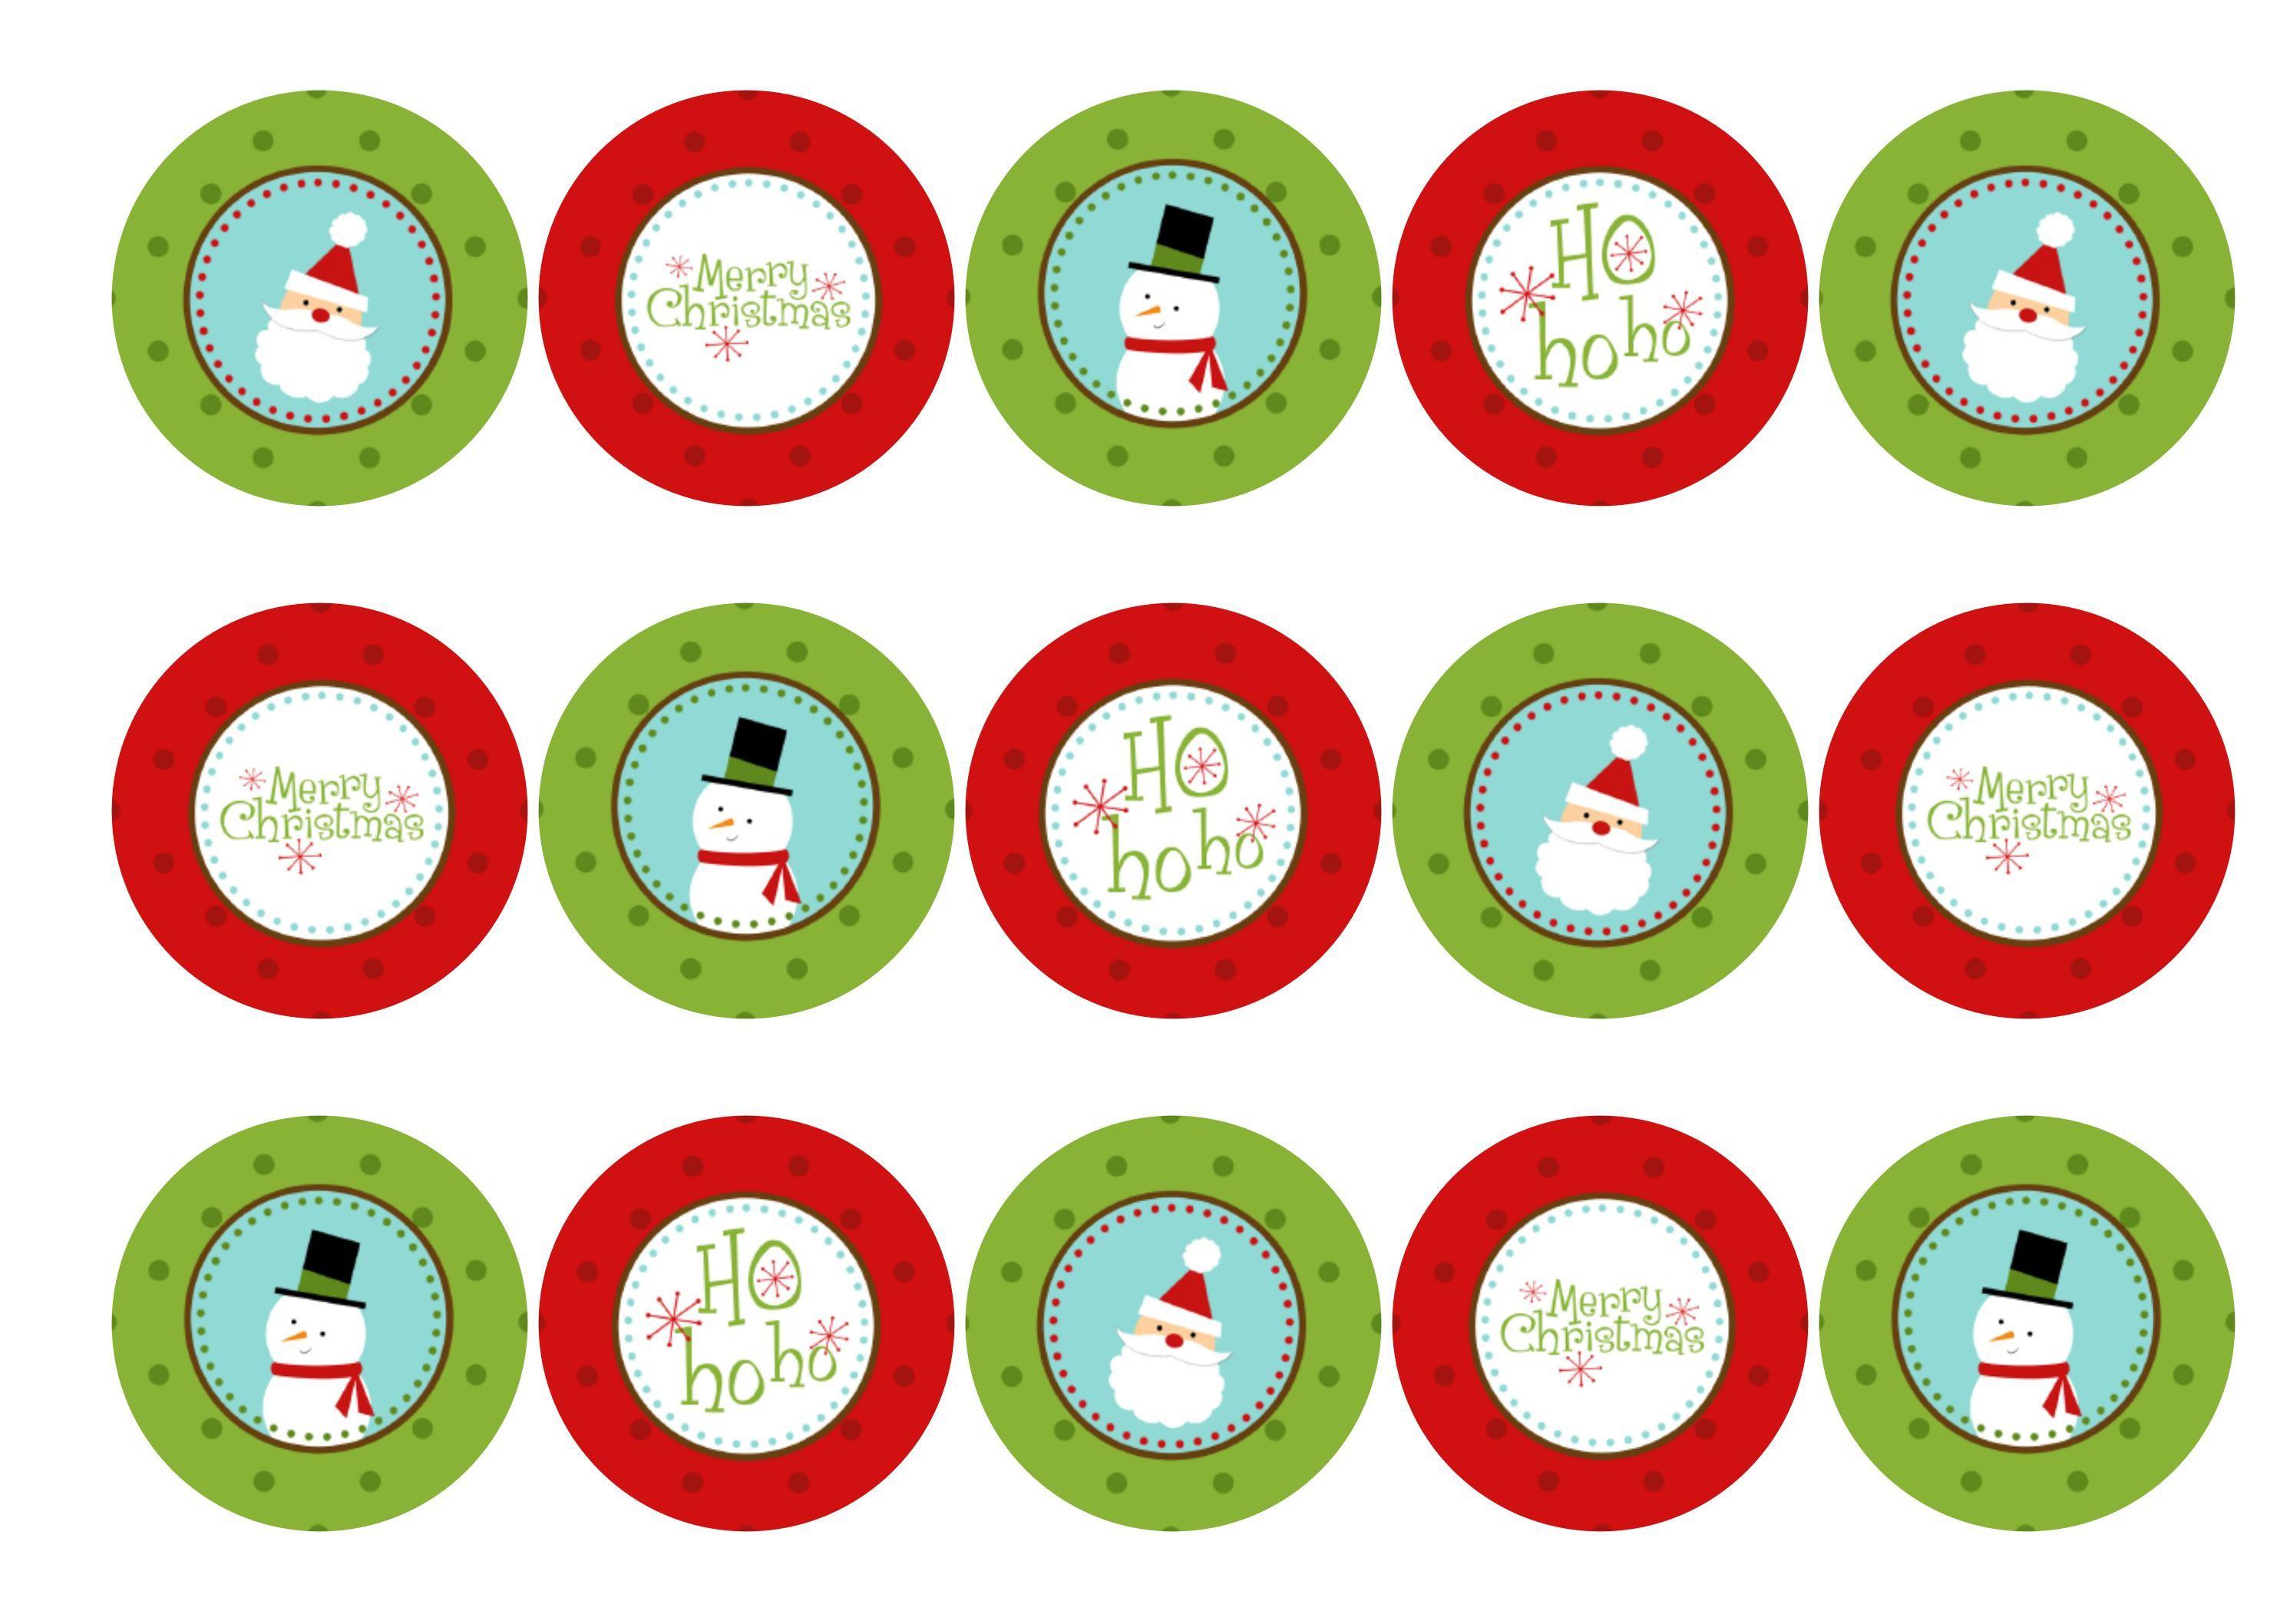 Edible Christmas cupcake toppers and cake toppers with Santa and Snowman images printed on rice paper or icing